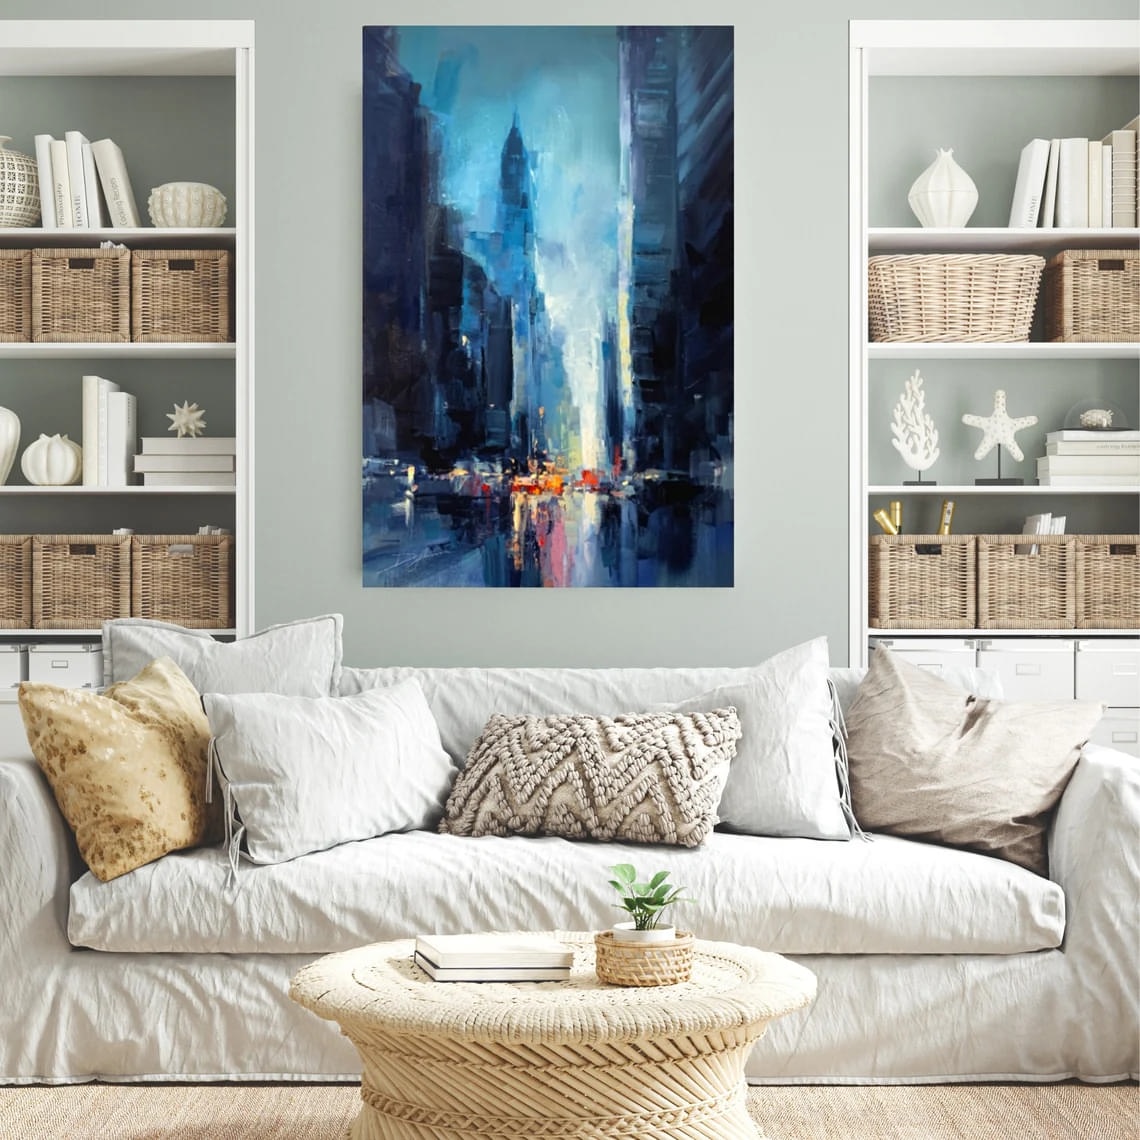 "Foggy Giants" - Cityscapes - Original Painting Sample on Wall